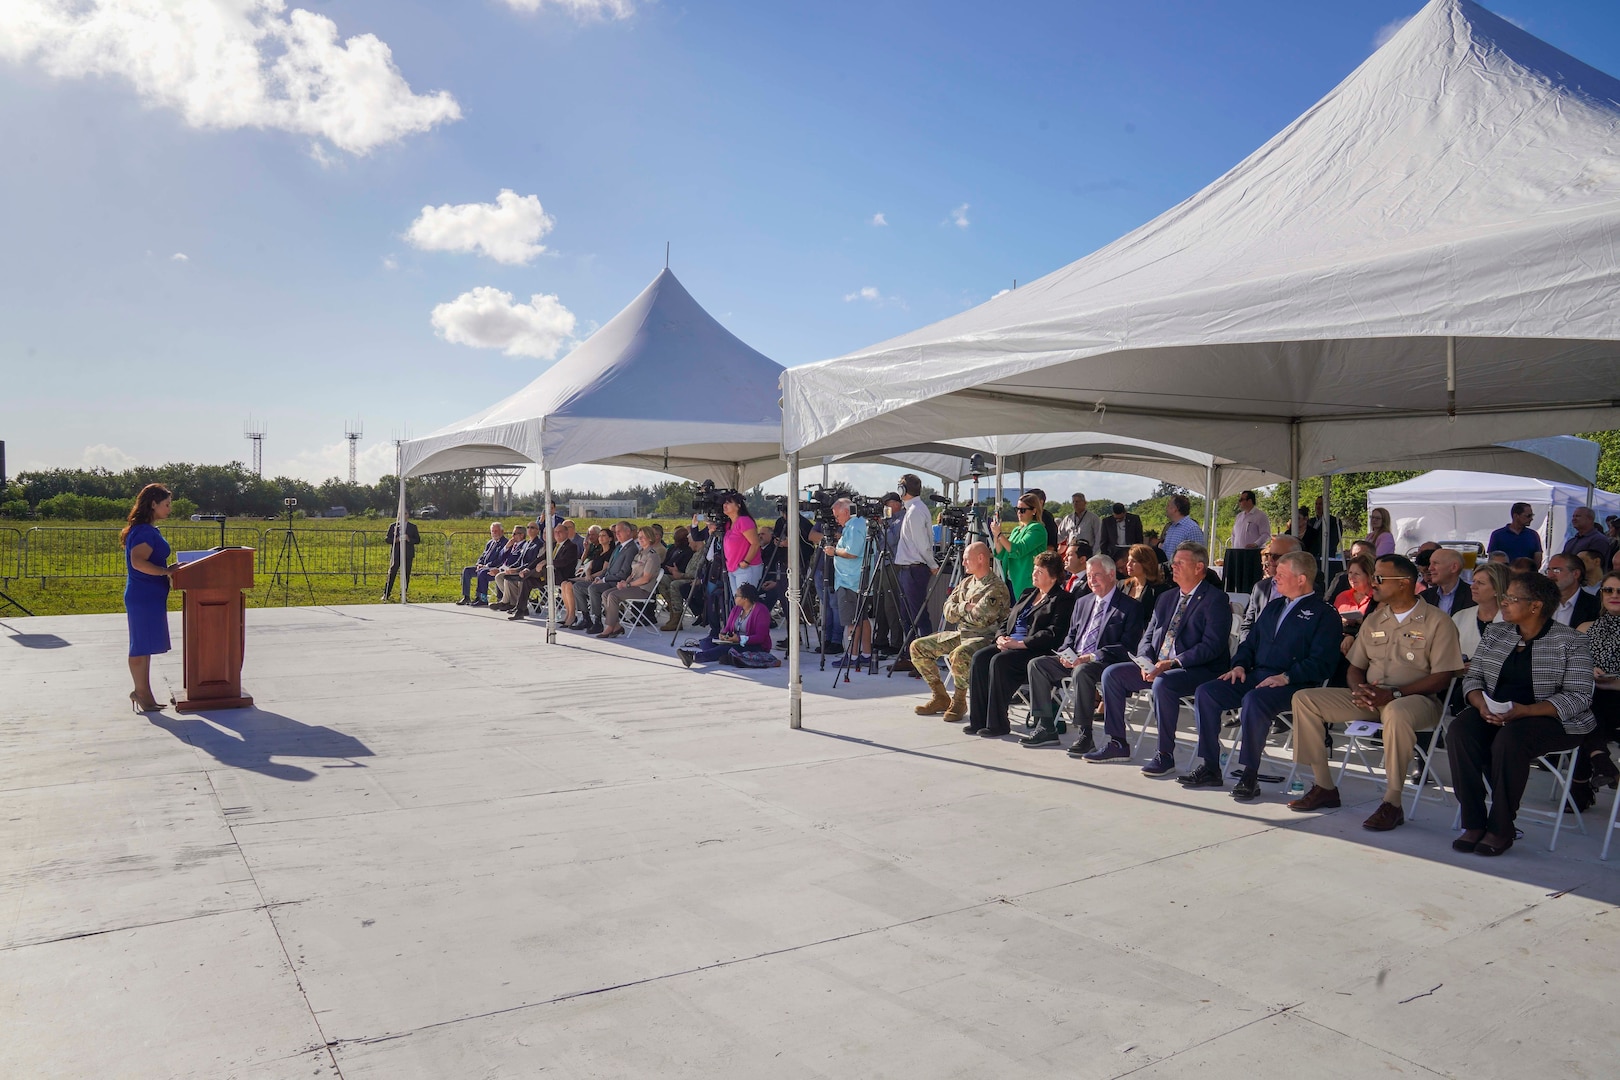 Christi Fraga, Mayor of the City of Doral, speaks during a groundbreaking ceremony for the future site of the new military housing complex supporting U.S. Southern Command's service members and their families.